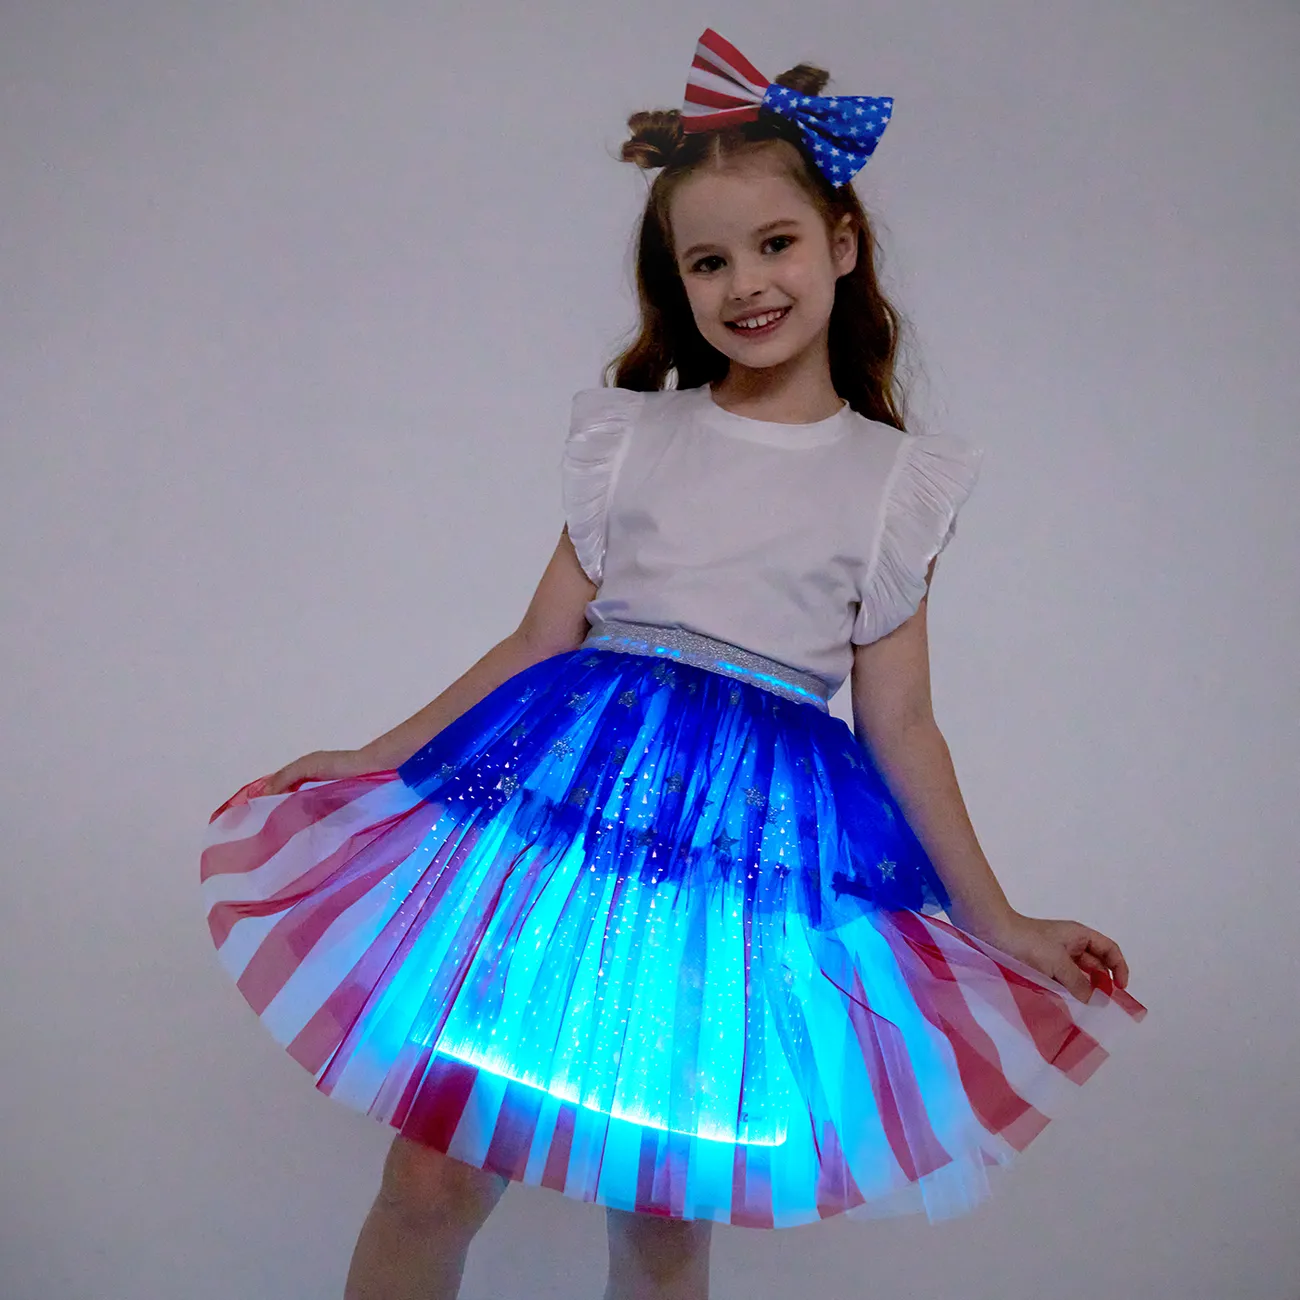 Go-Glow Light Up Contrast Skirt with Star Glitter Including Controller (Battery Inside) Dark blue/White/Red big image 1